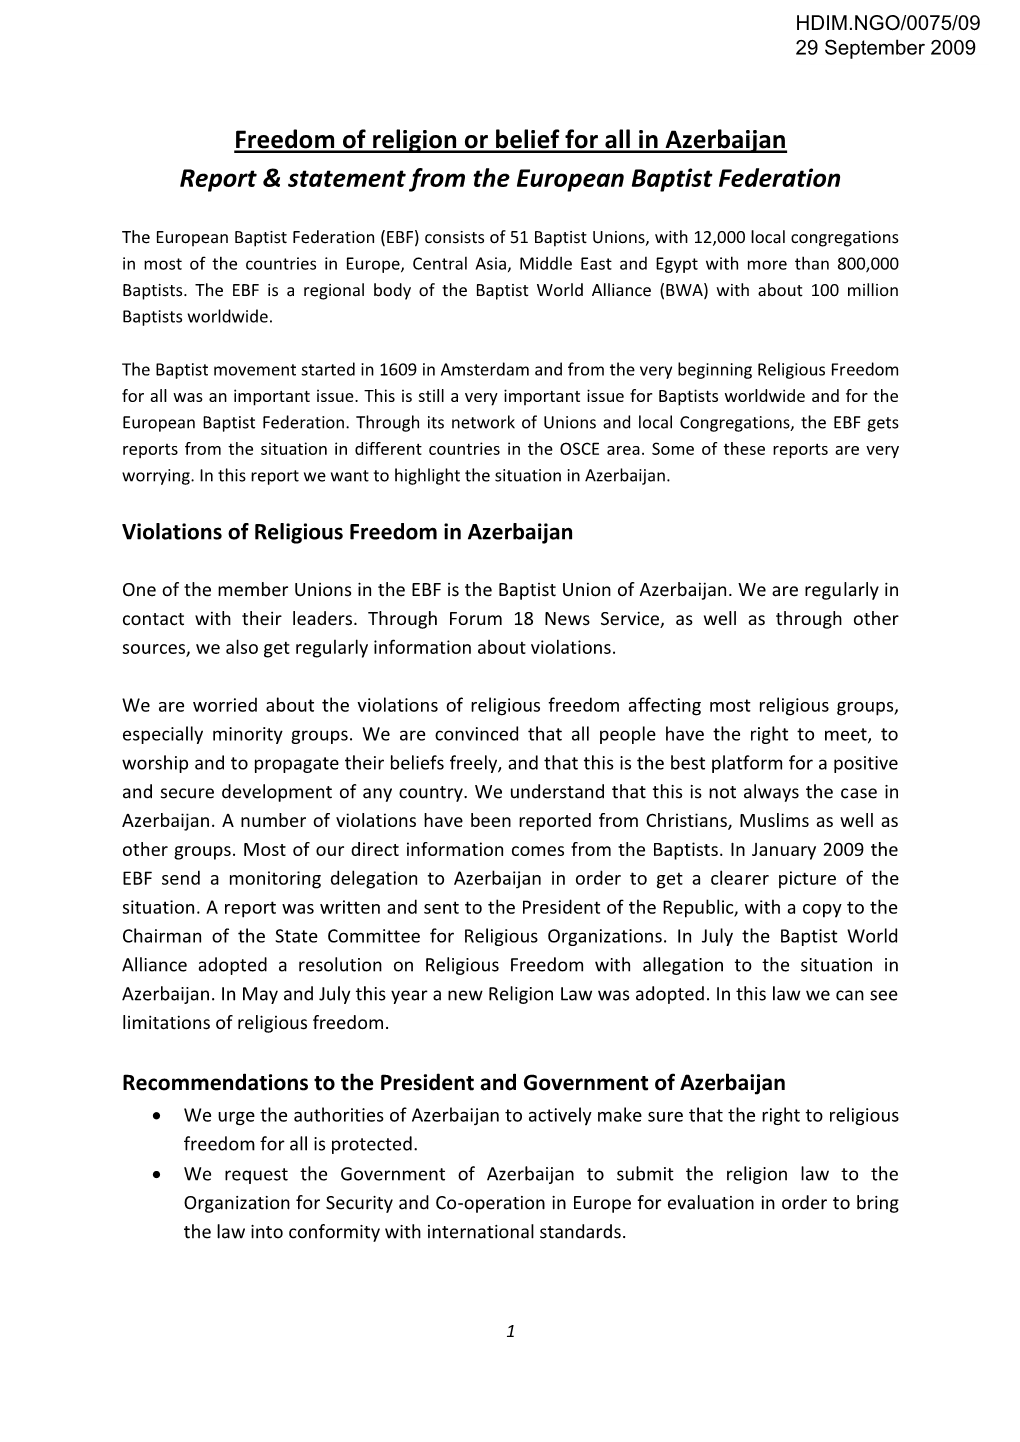 Freedom of Religion Or Belief for All in Azerbaijan Report & Statement From